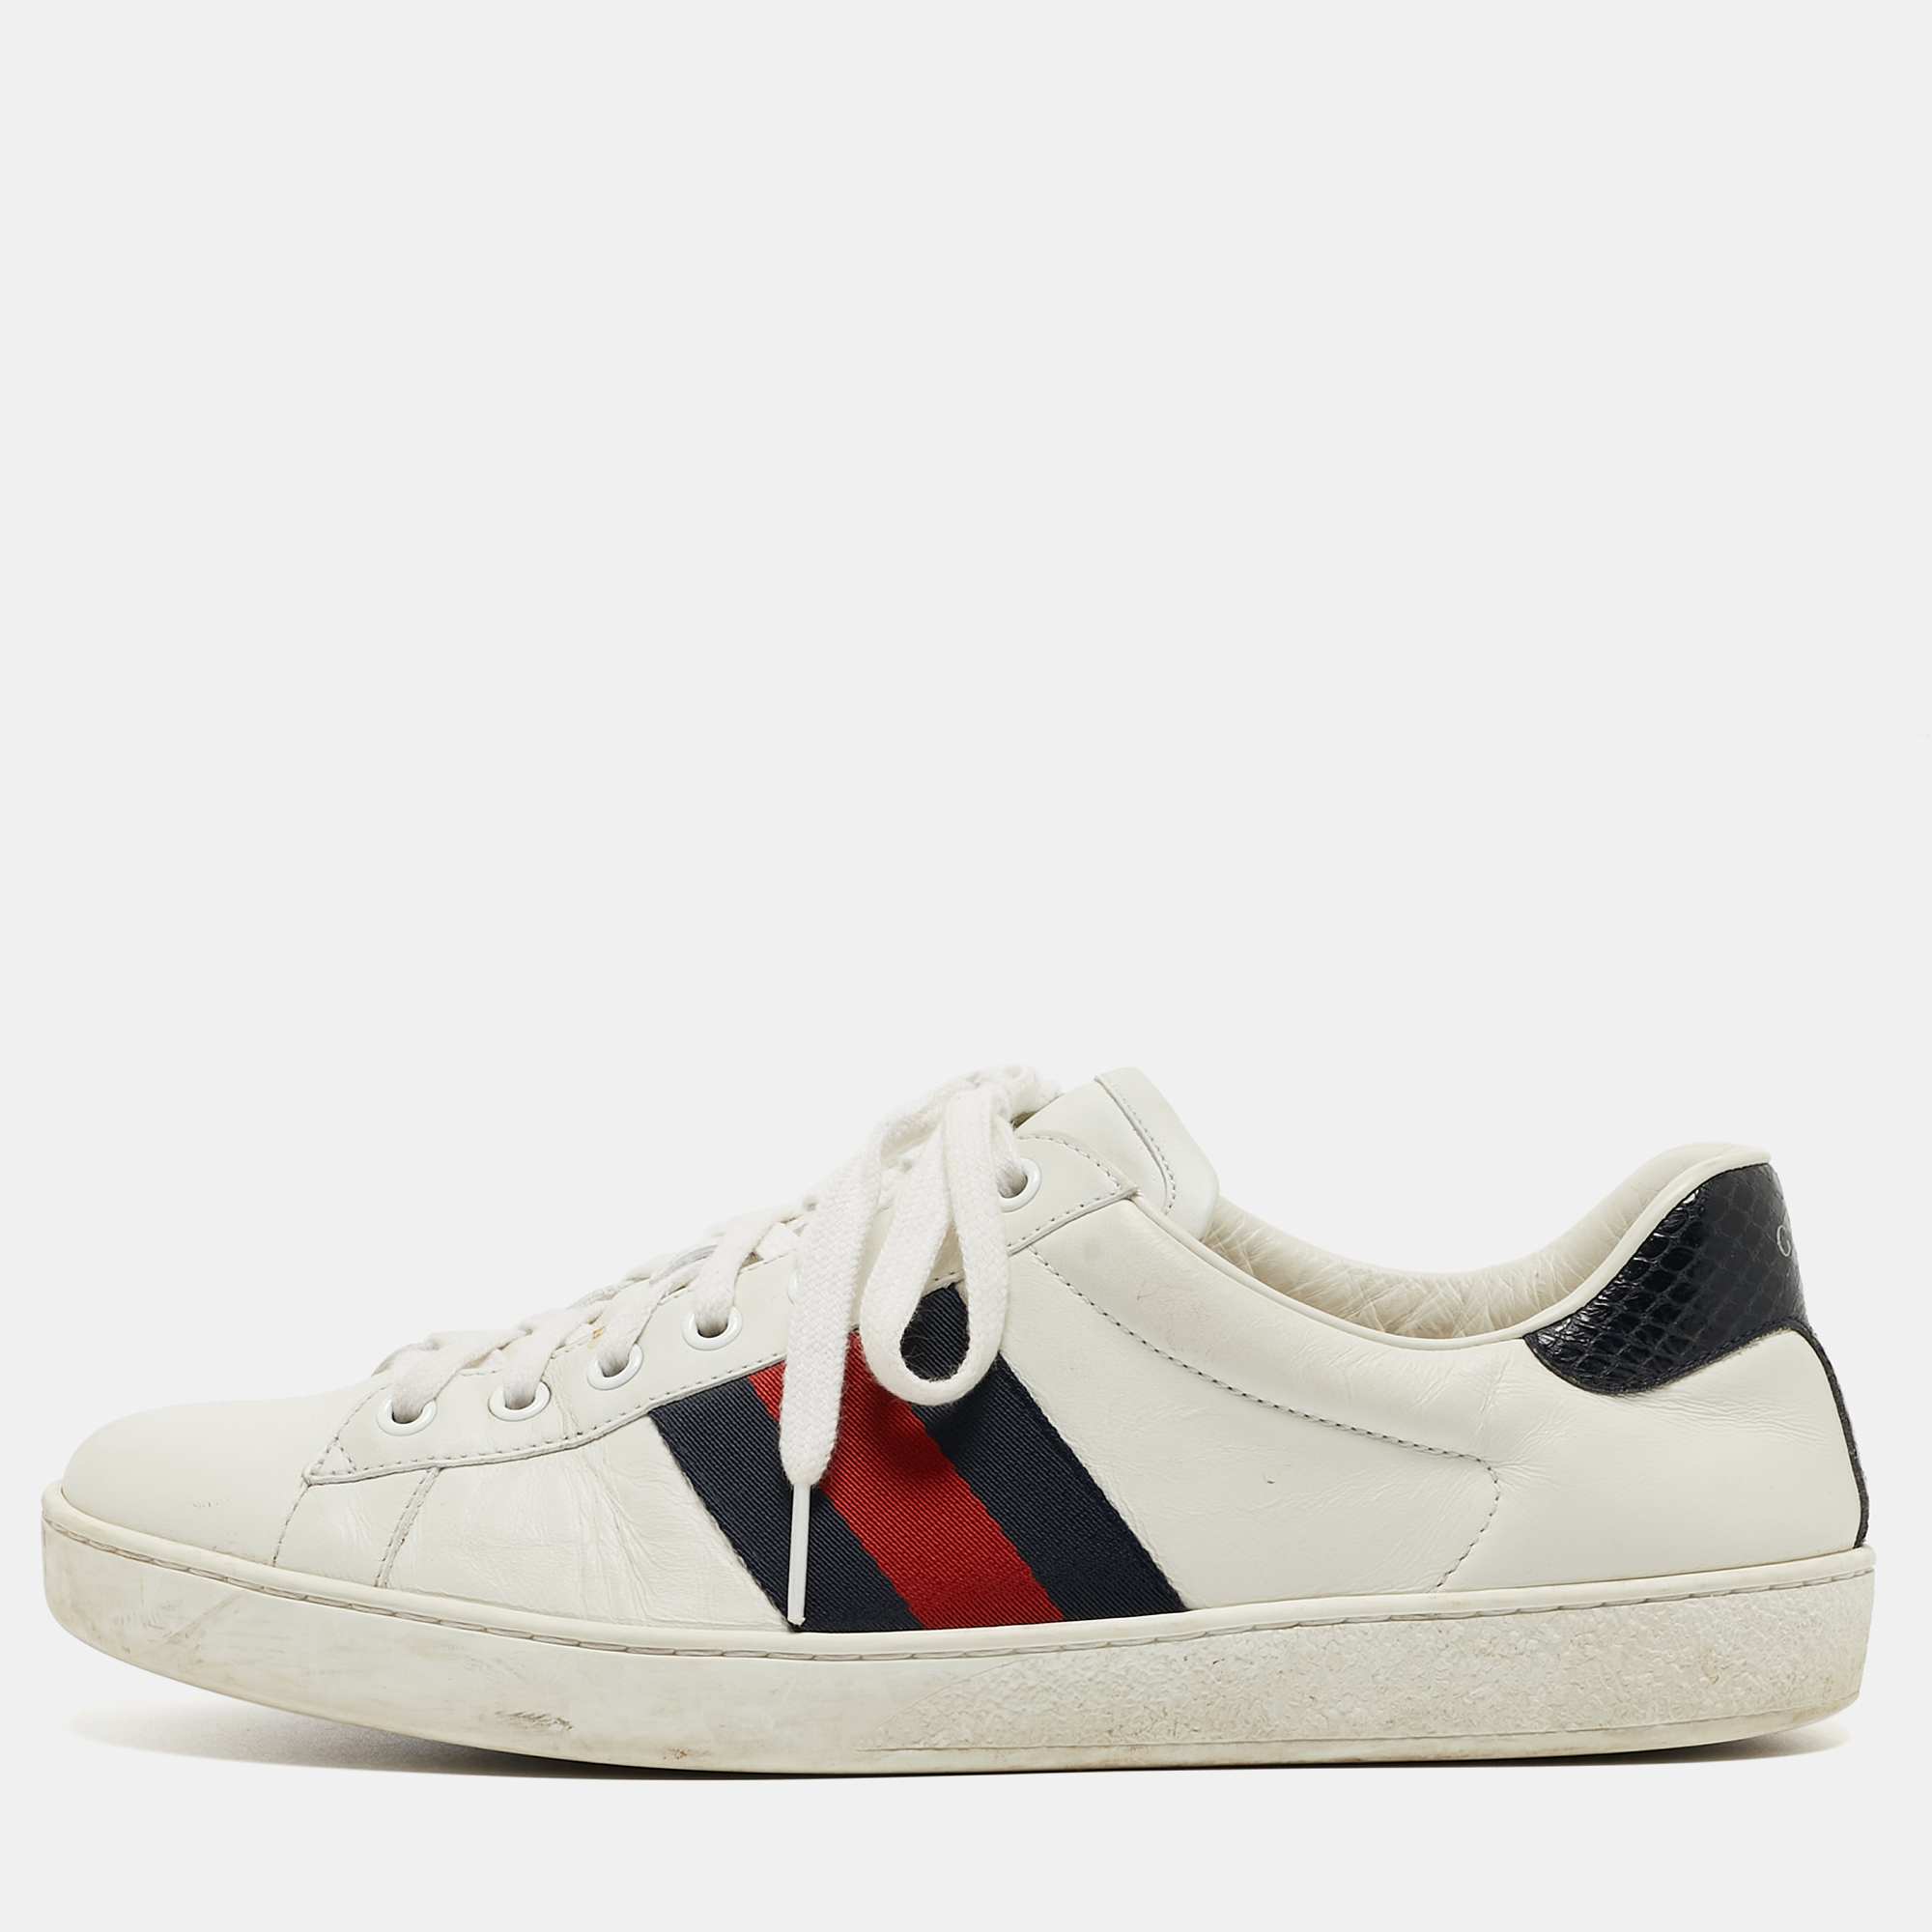 Coming in a classic silhouette these Gucci sneakers are a seamless combination of luxury comfort and style. These sneakers are designed with signature details and comfortable insoles.